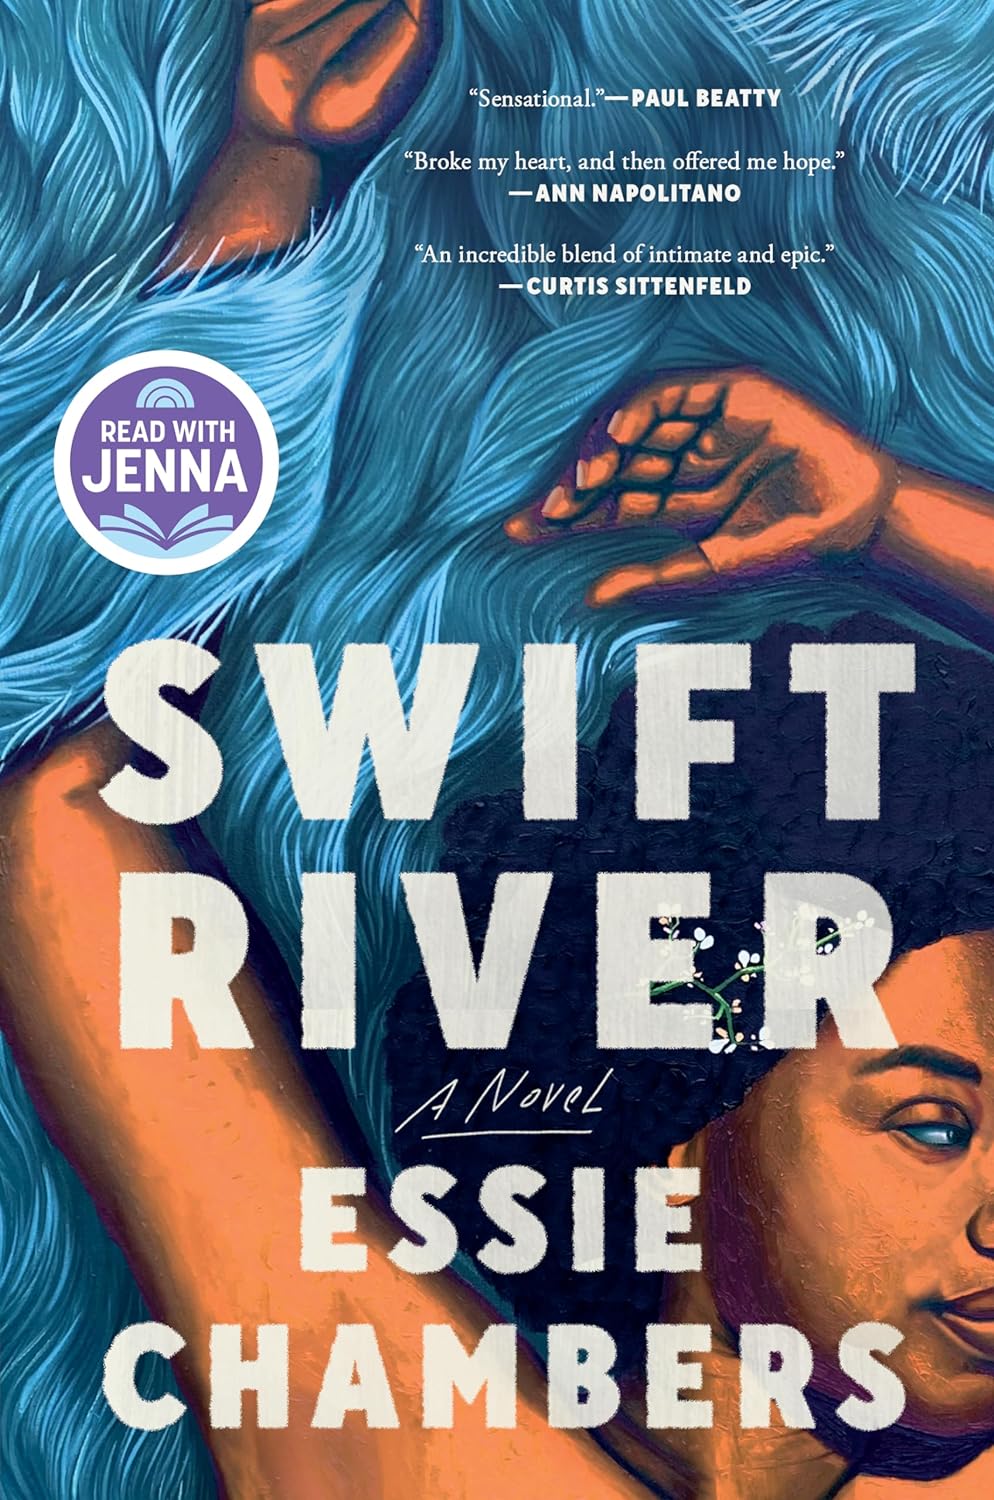 Image for "Swift River"